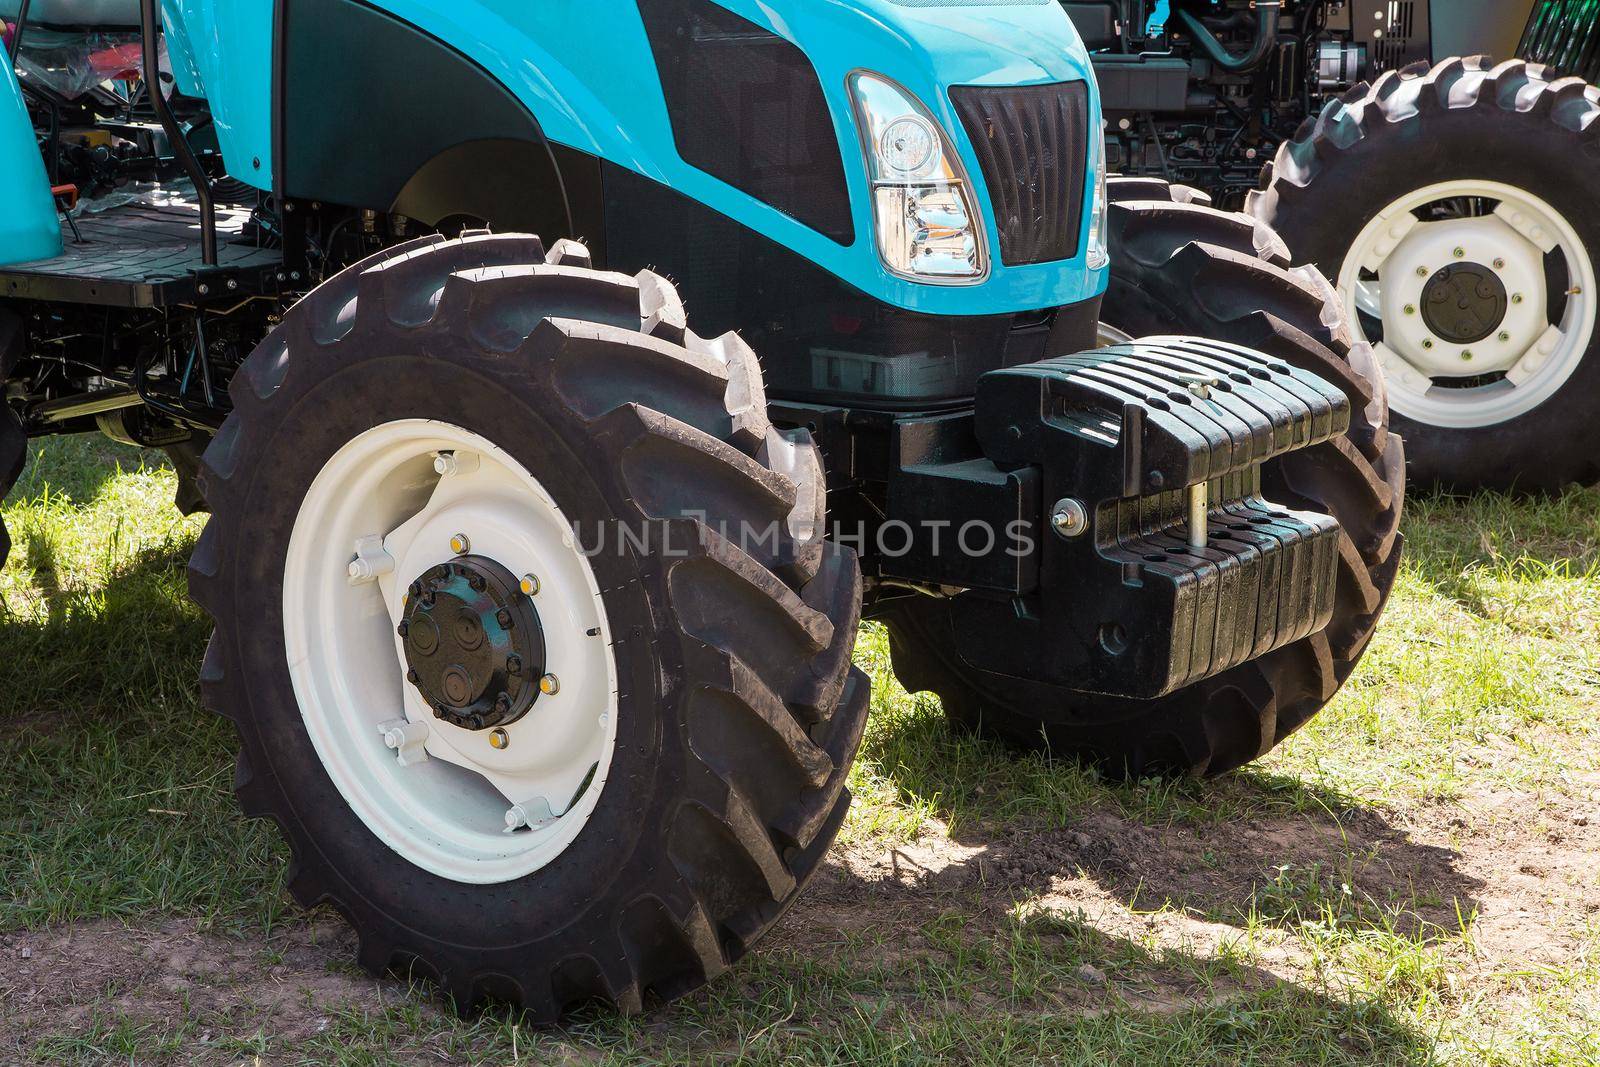 Modern tractor on modern agricultural machinery.